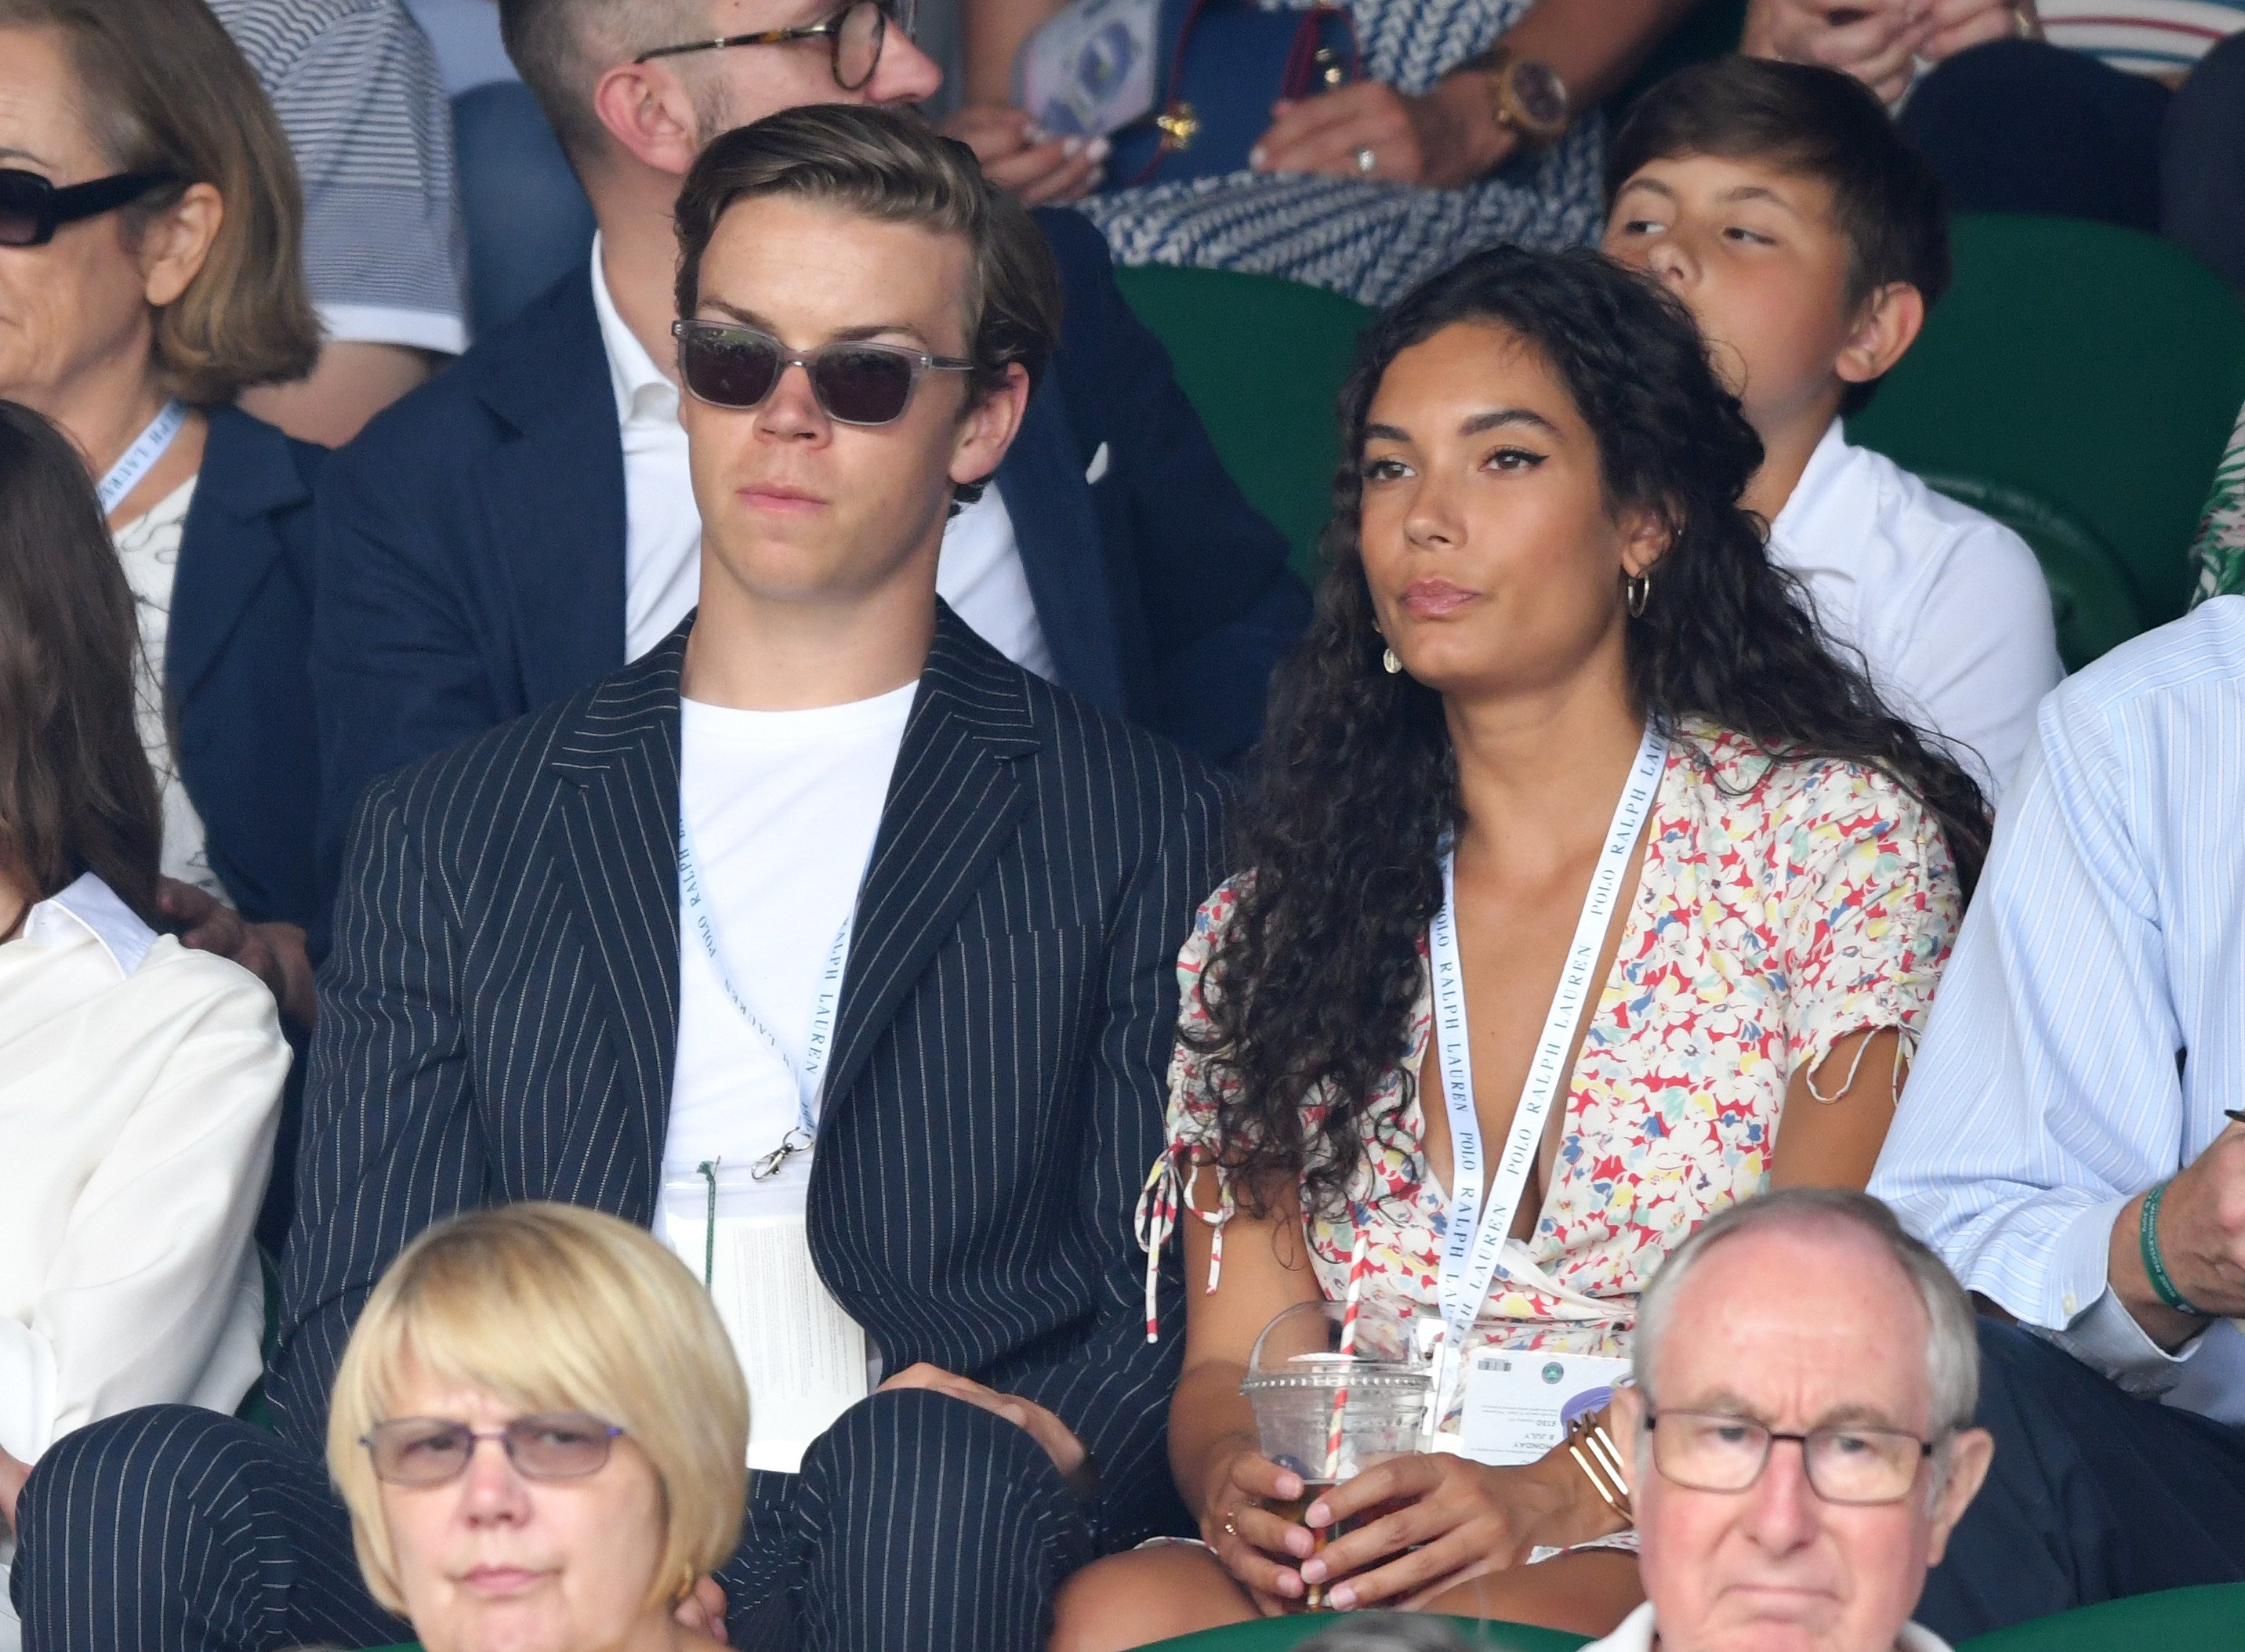 Will Poulter and Yasmeen Scott at the Wimbledon Tennis Championships in 2019, in London, England. | Source: Getty Images